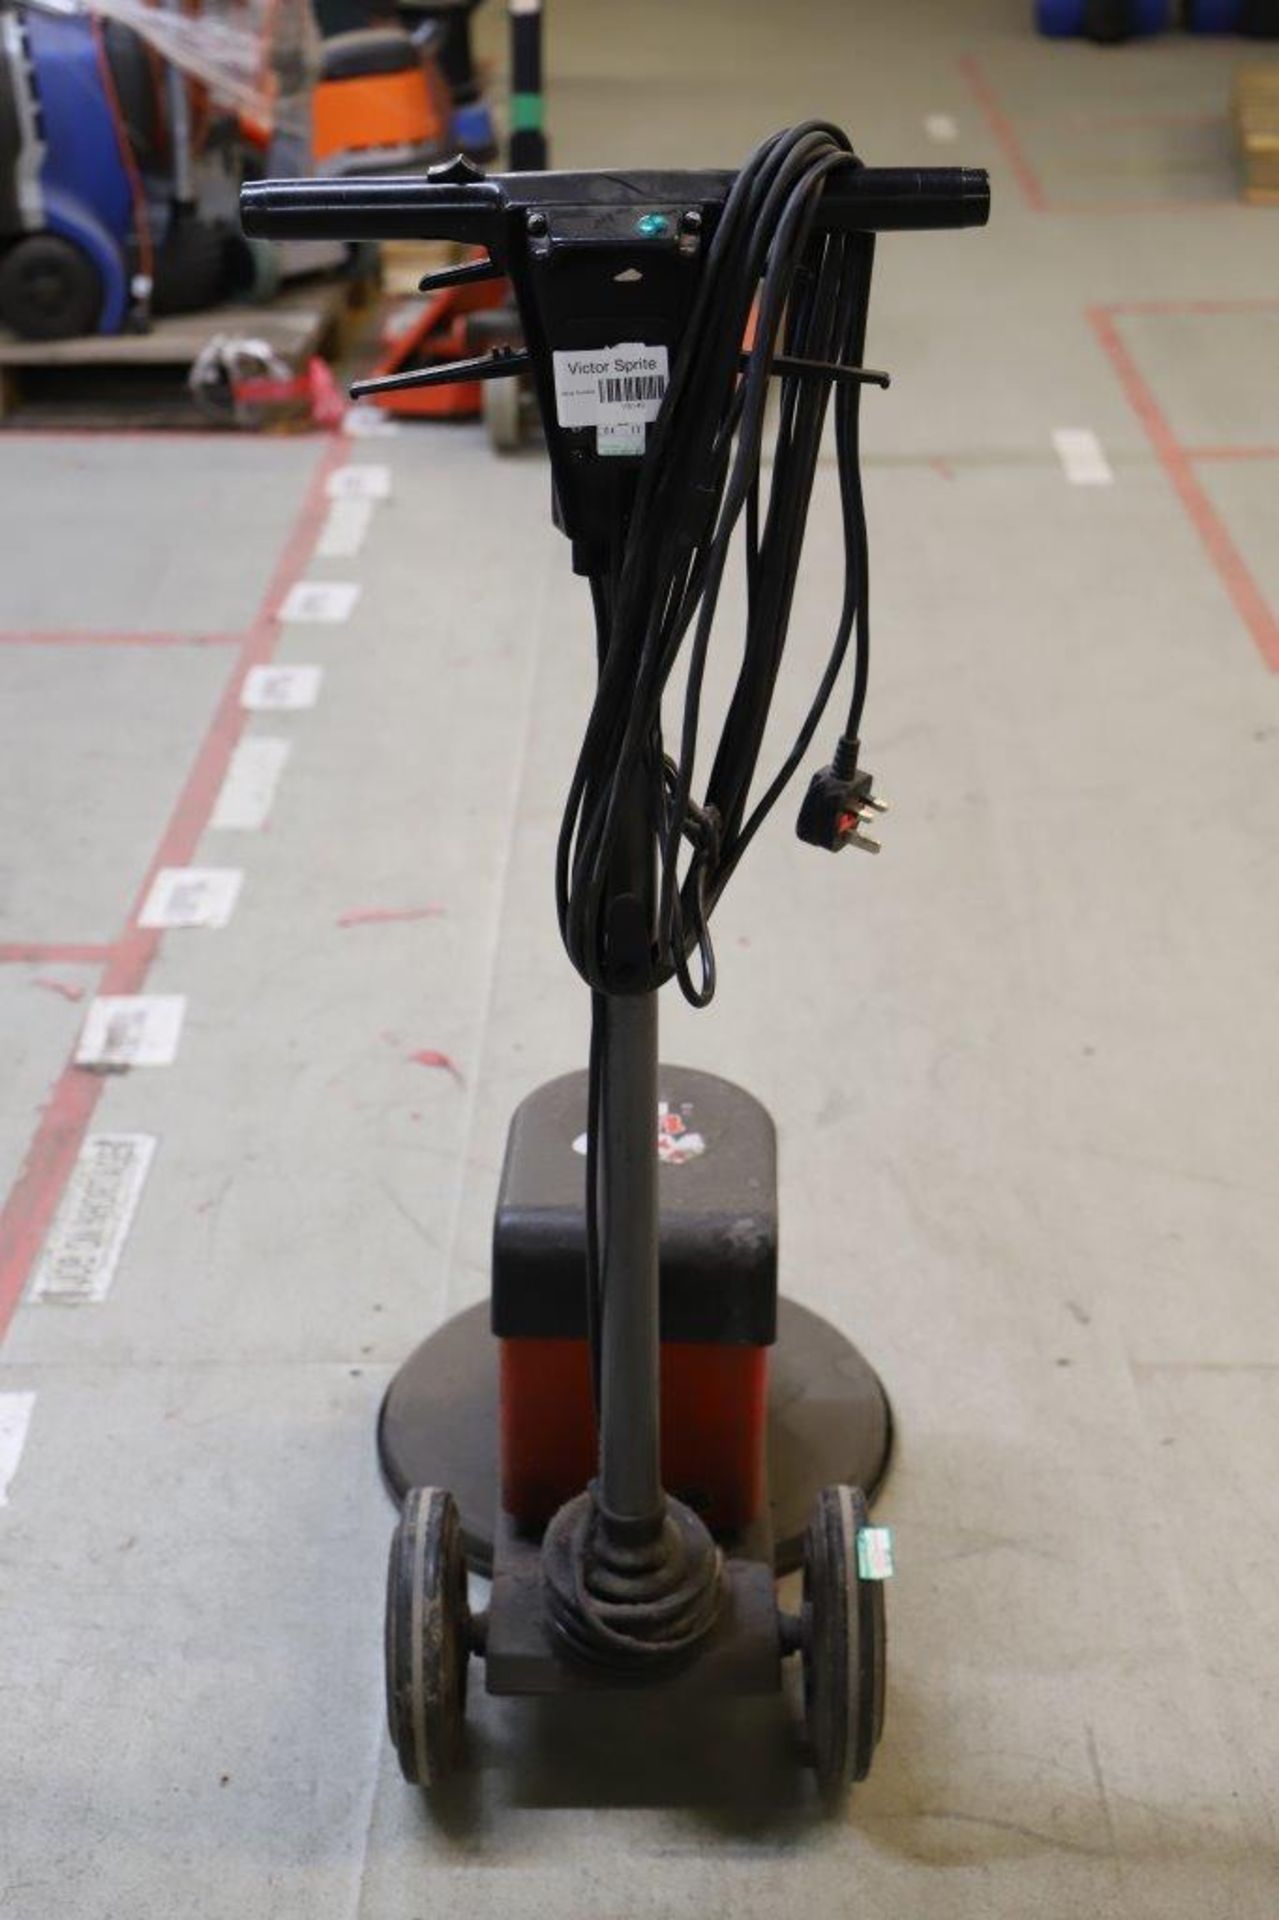 PAT tested Industrial cleaning machines, includes: HV380 BUFFER, TENNANT, TRUVOX, VICTOR SPRITE. - Image 8 of 8